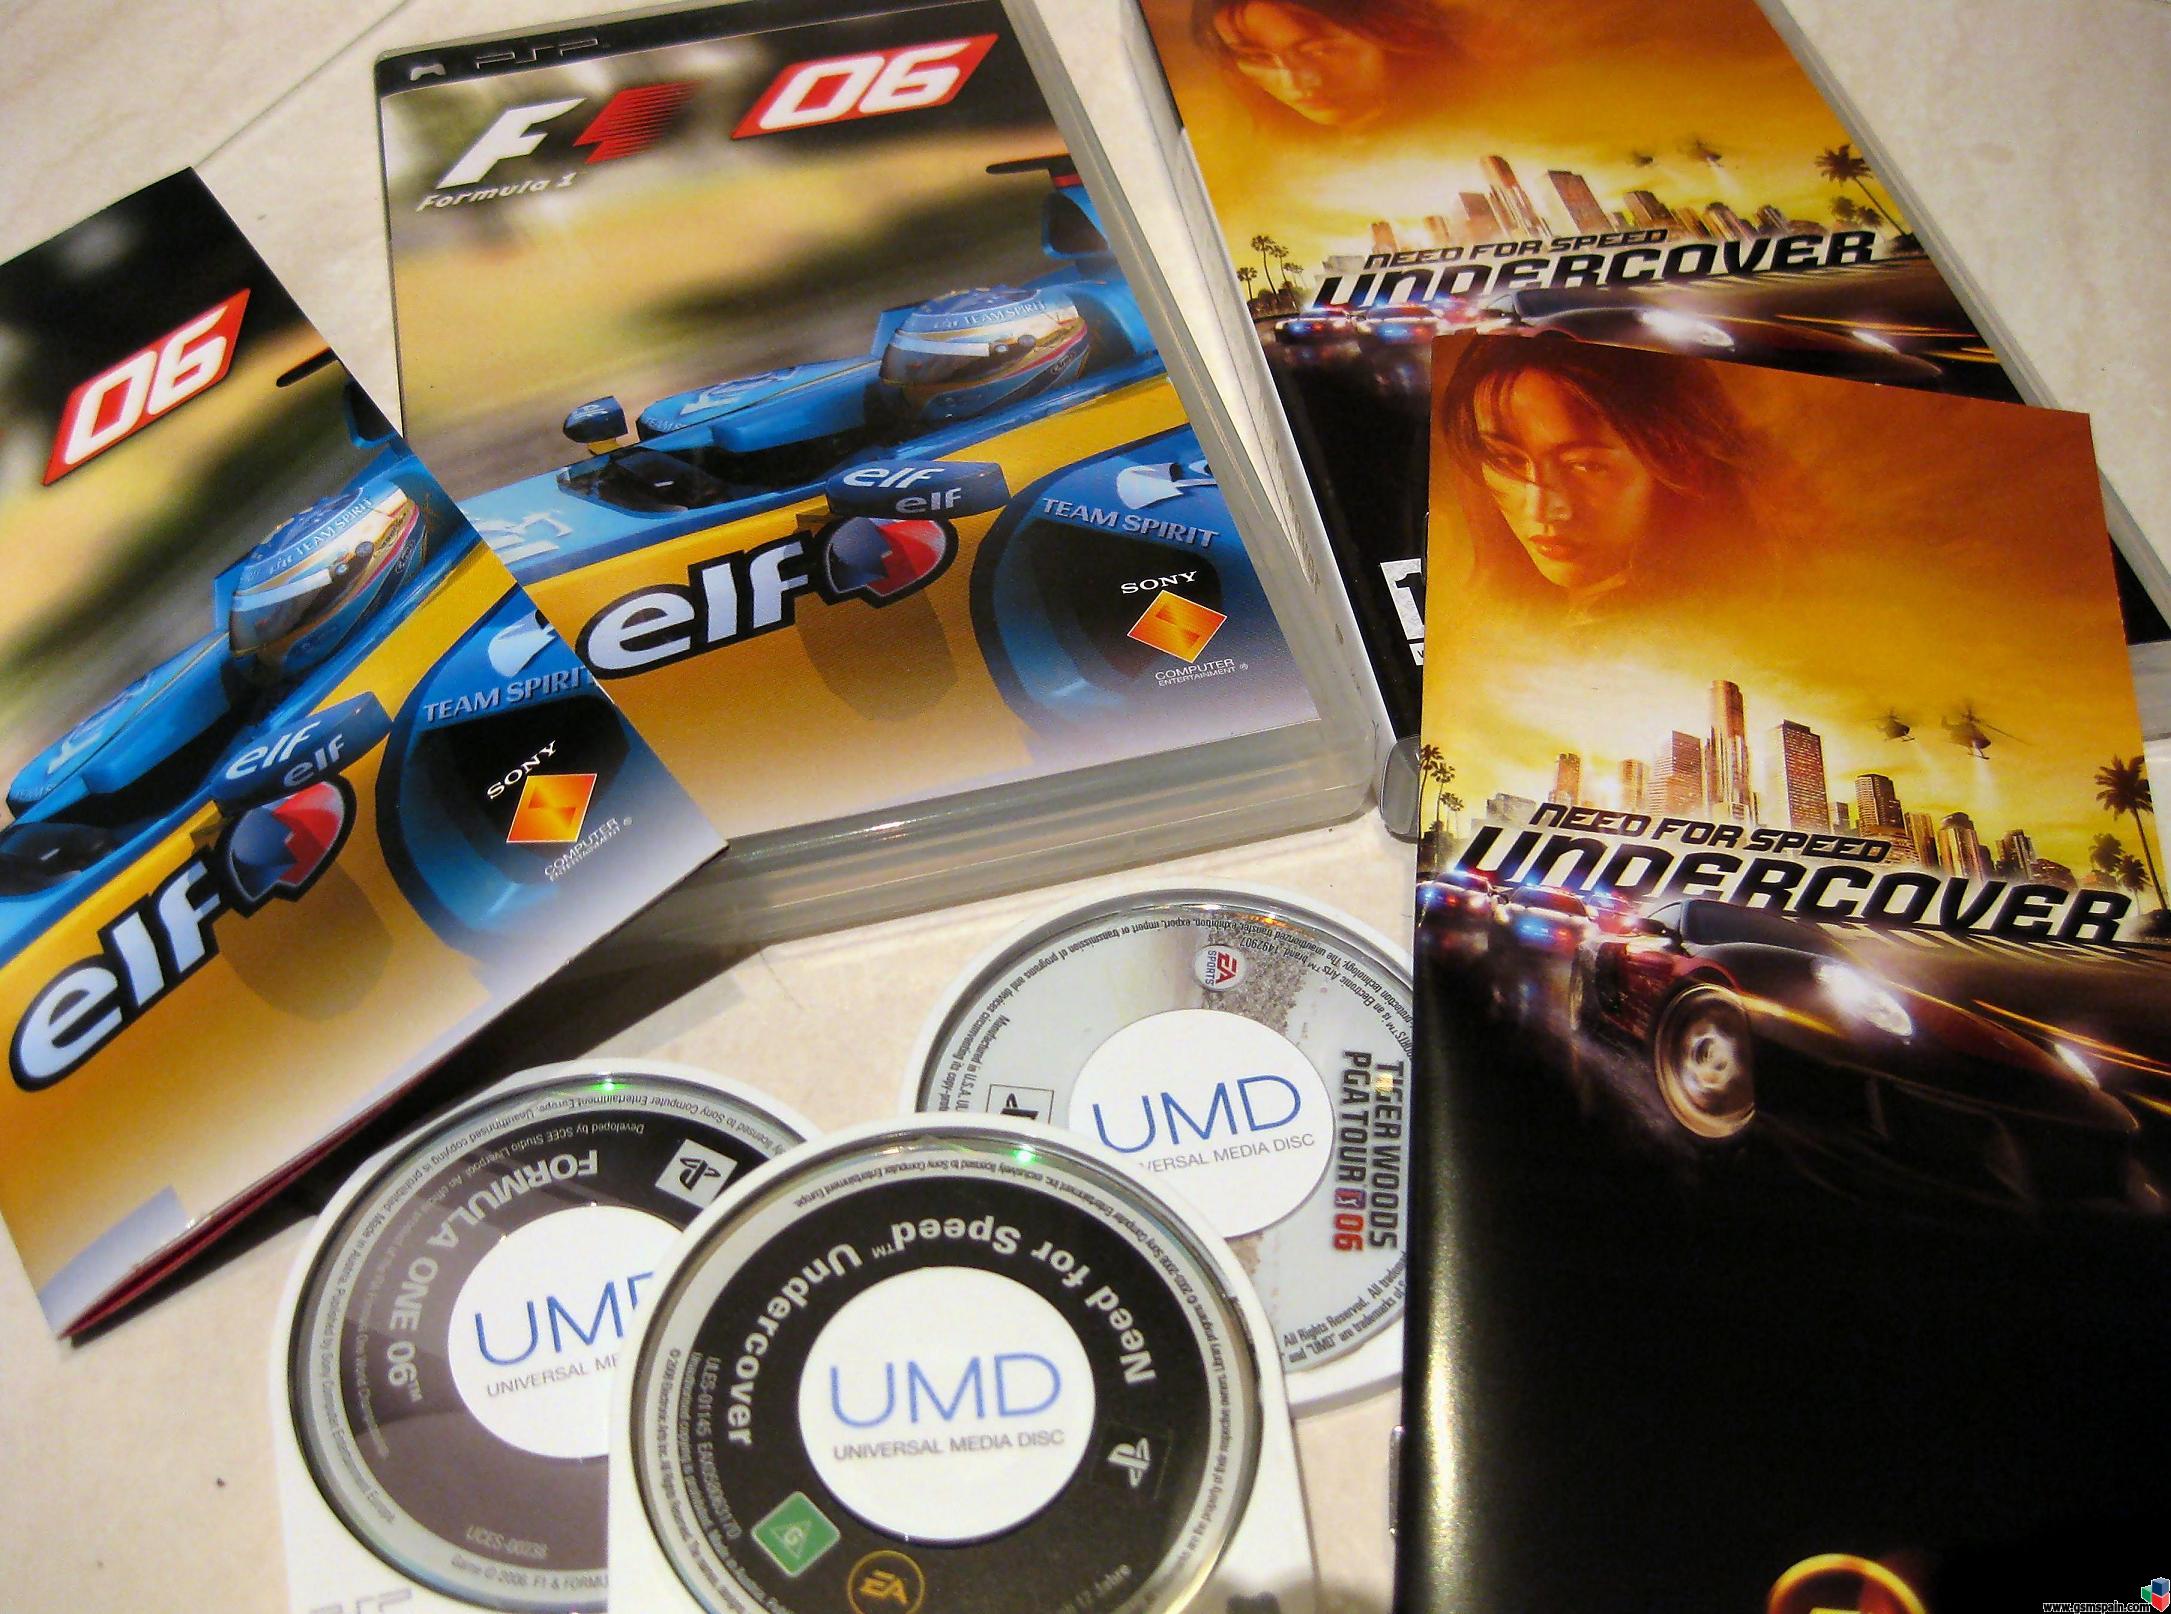 --LOTE DE 3 JUEGOS para PSP-- F1 06  /  Need for speed undercover  /  Tiger Woods 06